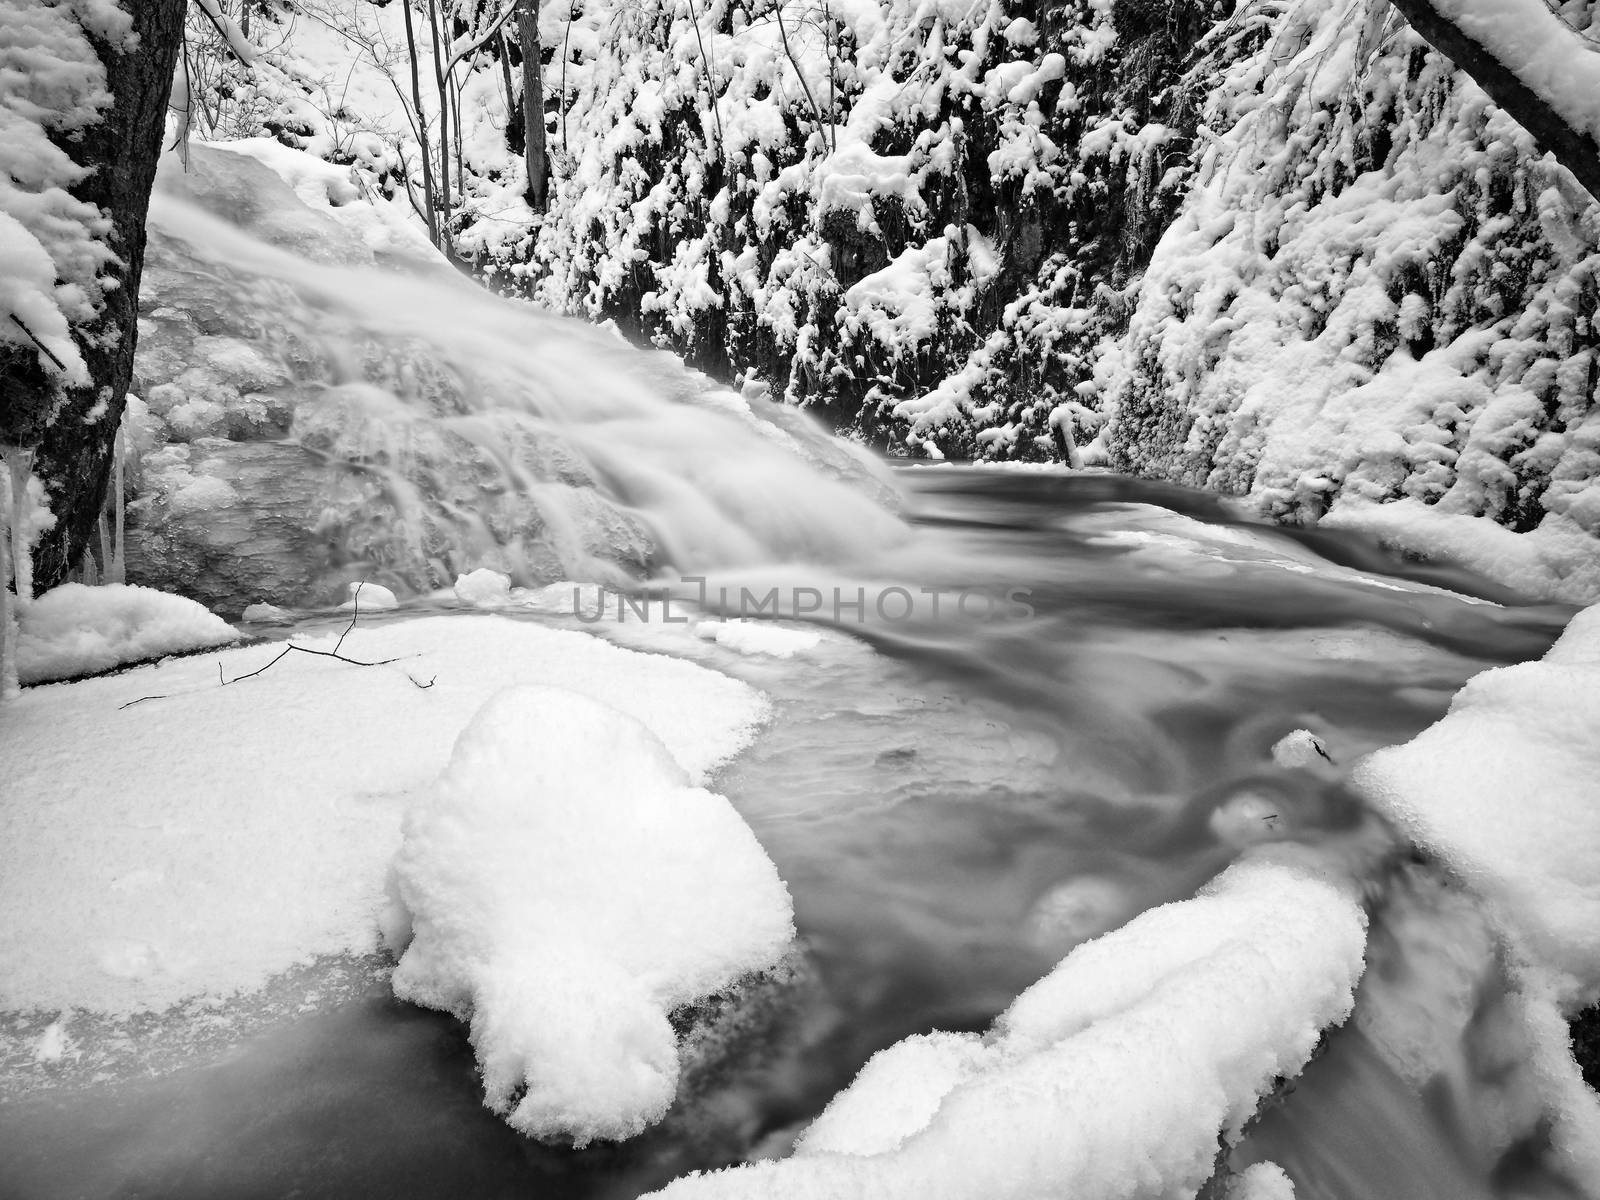 Frozen cascade of waterfall, icy twigs and icy boulders in frozen foam of rapid stream. Winter creek. Extreme freeze.